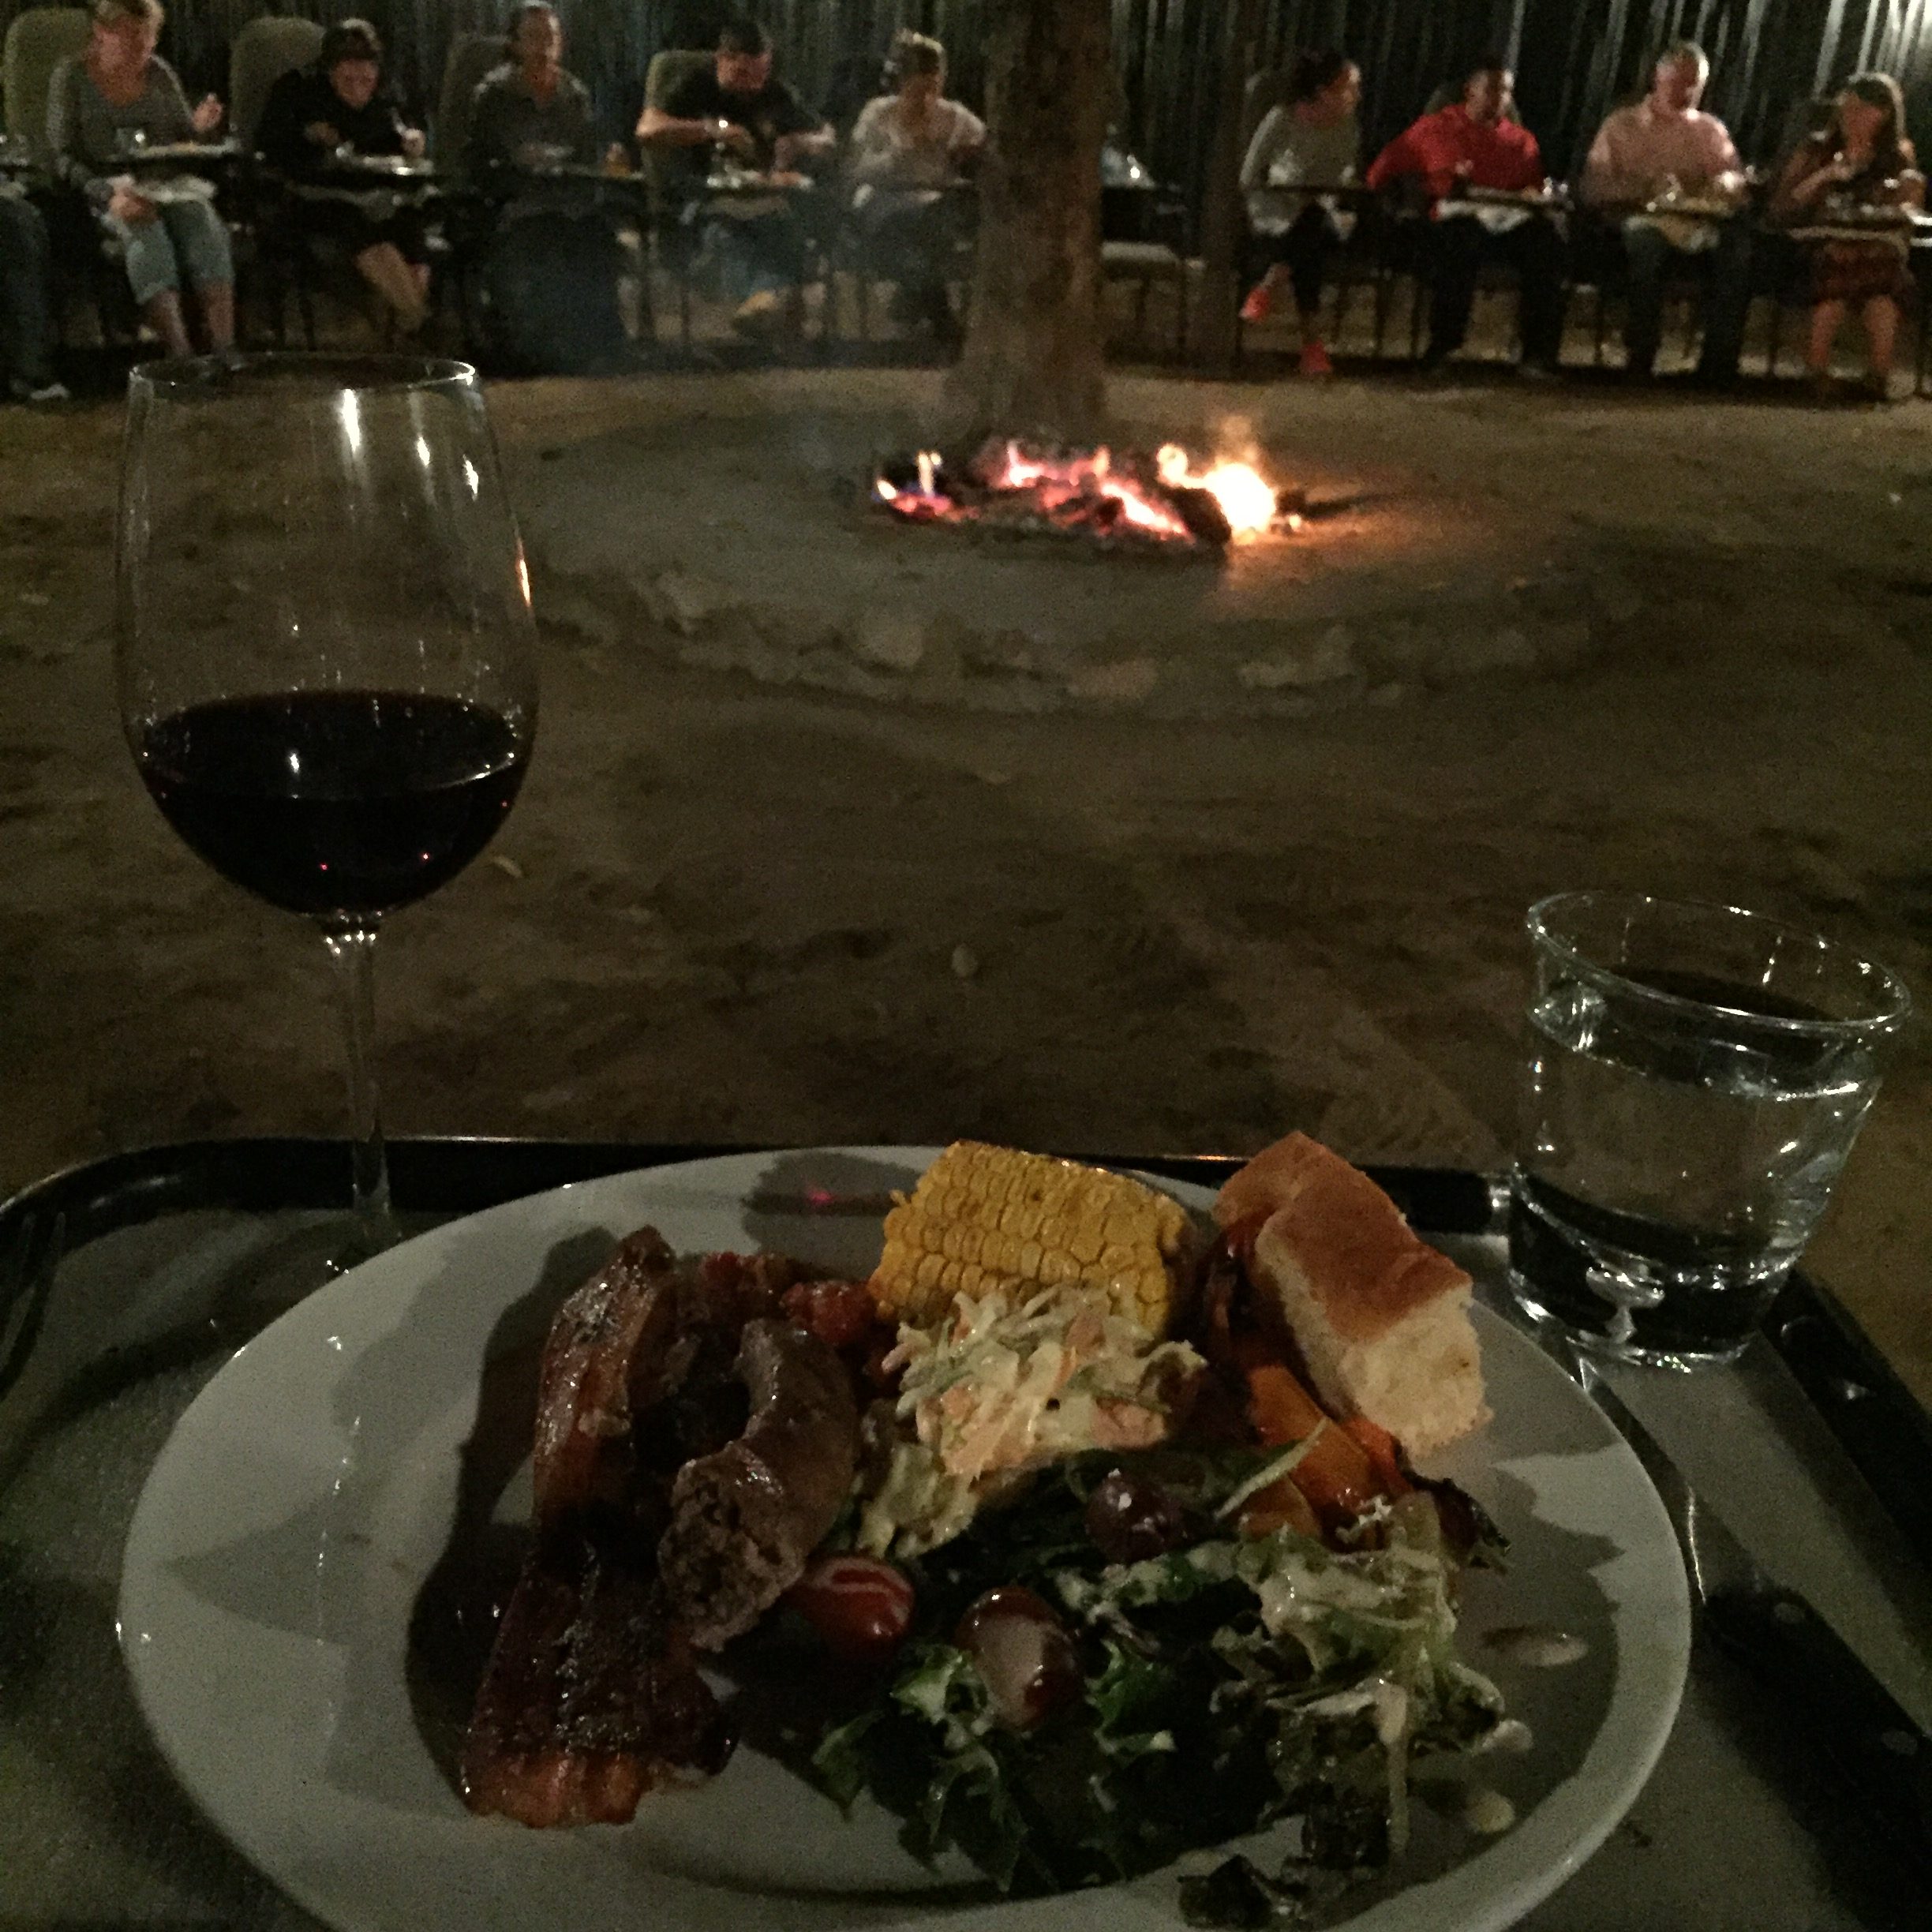 Braai in the boma at Moditlo River Lodge in Hoedspruit, South Africa for South Africa's National Heritage Day.